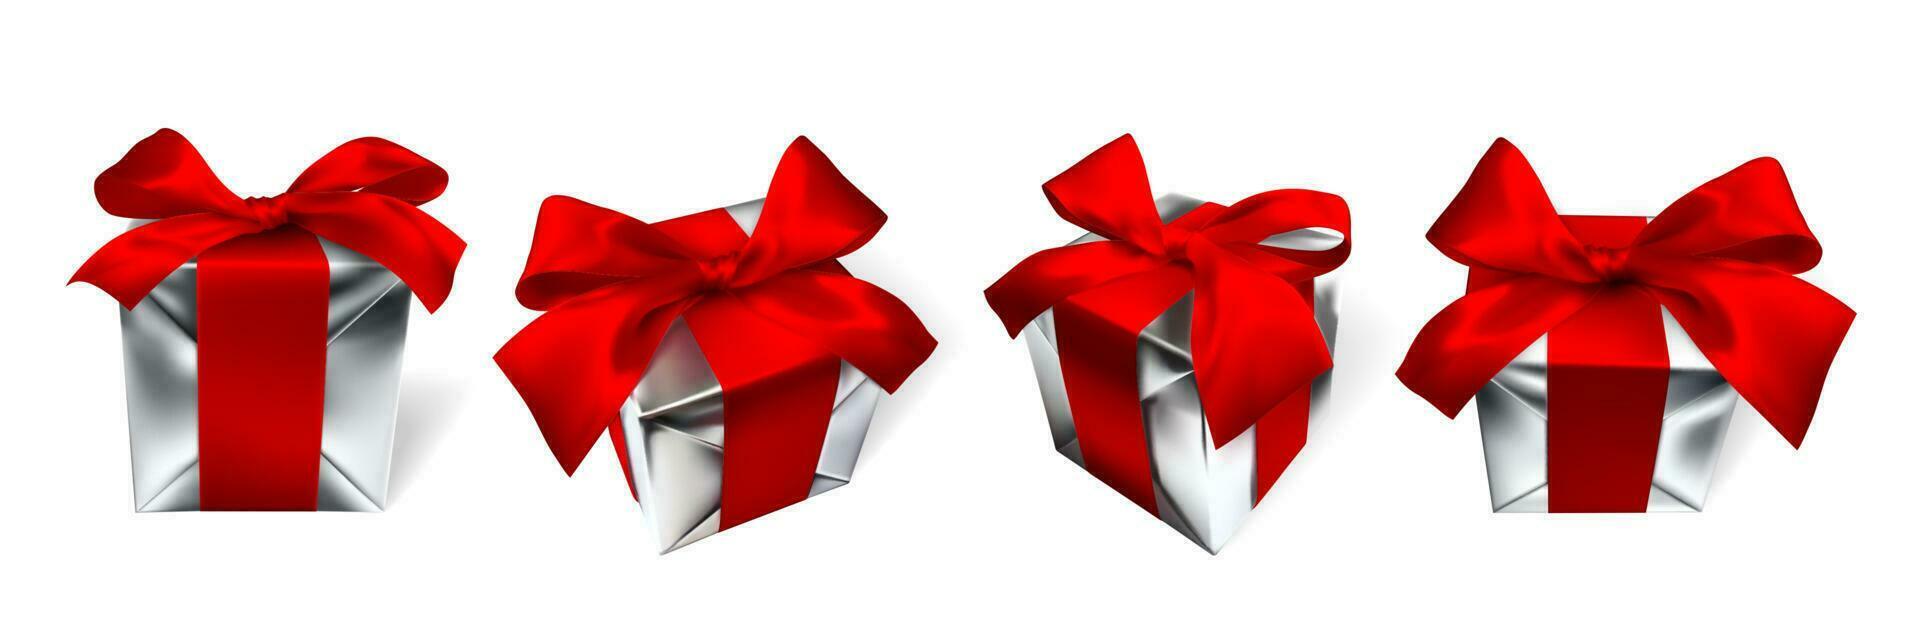 Realistic gift box with red bow isolated on white background. Vector illustration